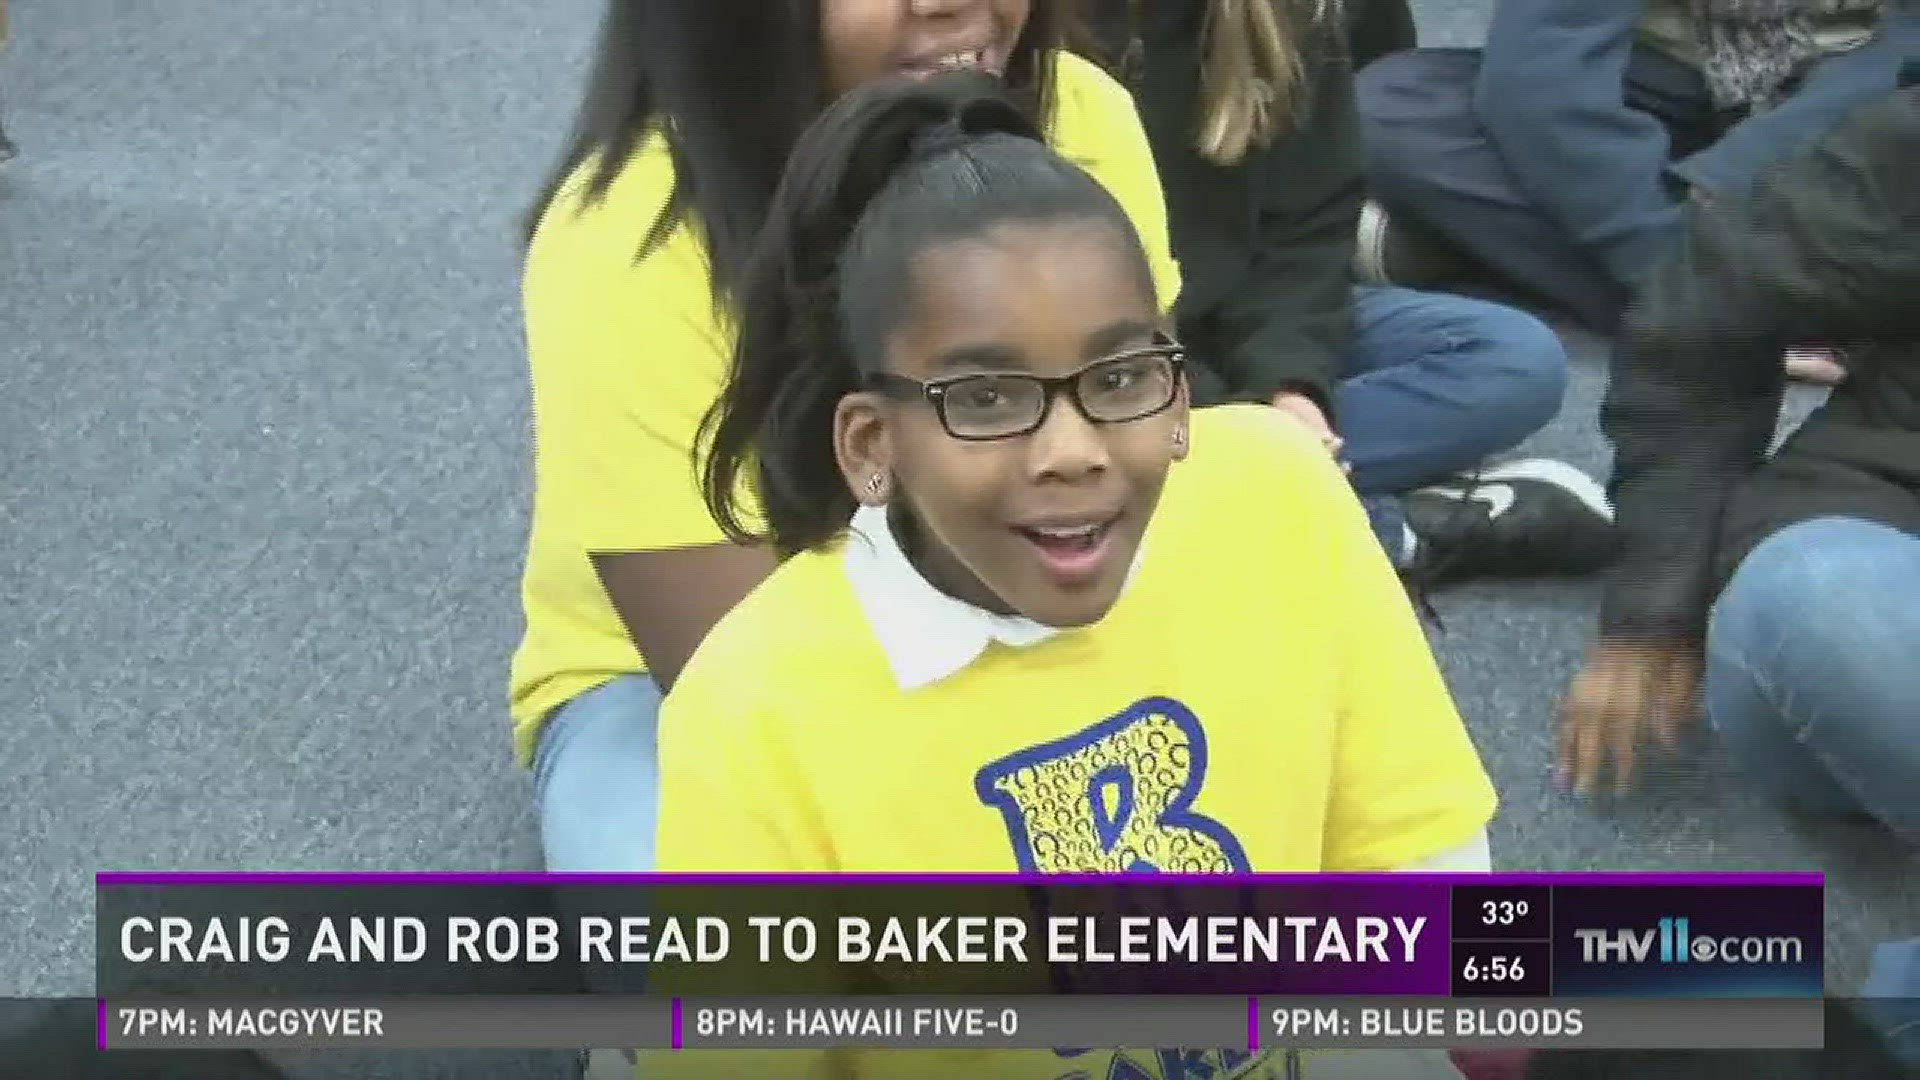 Craig read at Baker Elementary ahead of Rob's appearance in the morning.